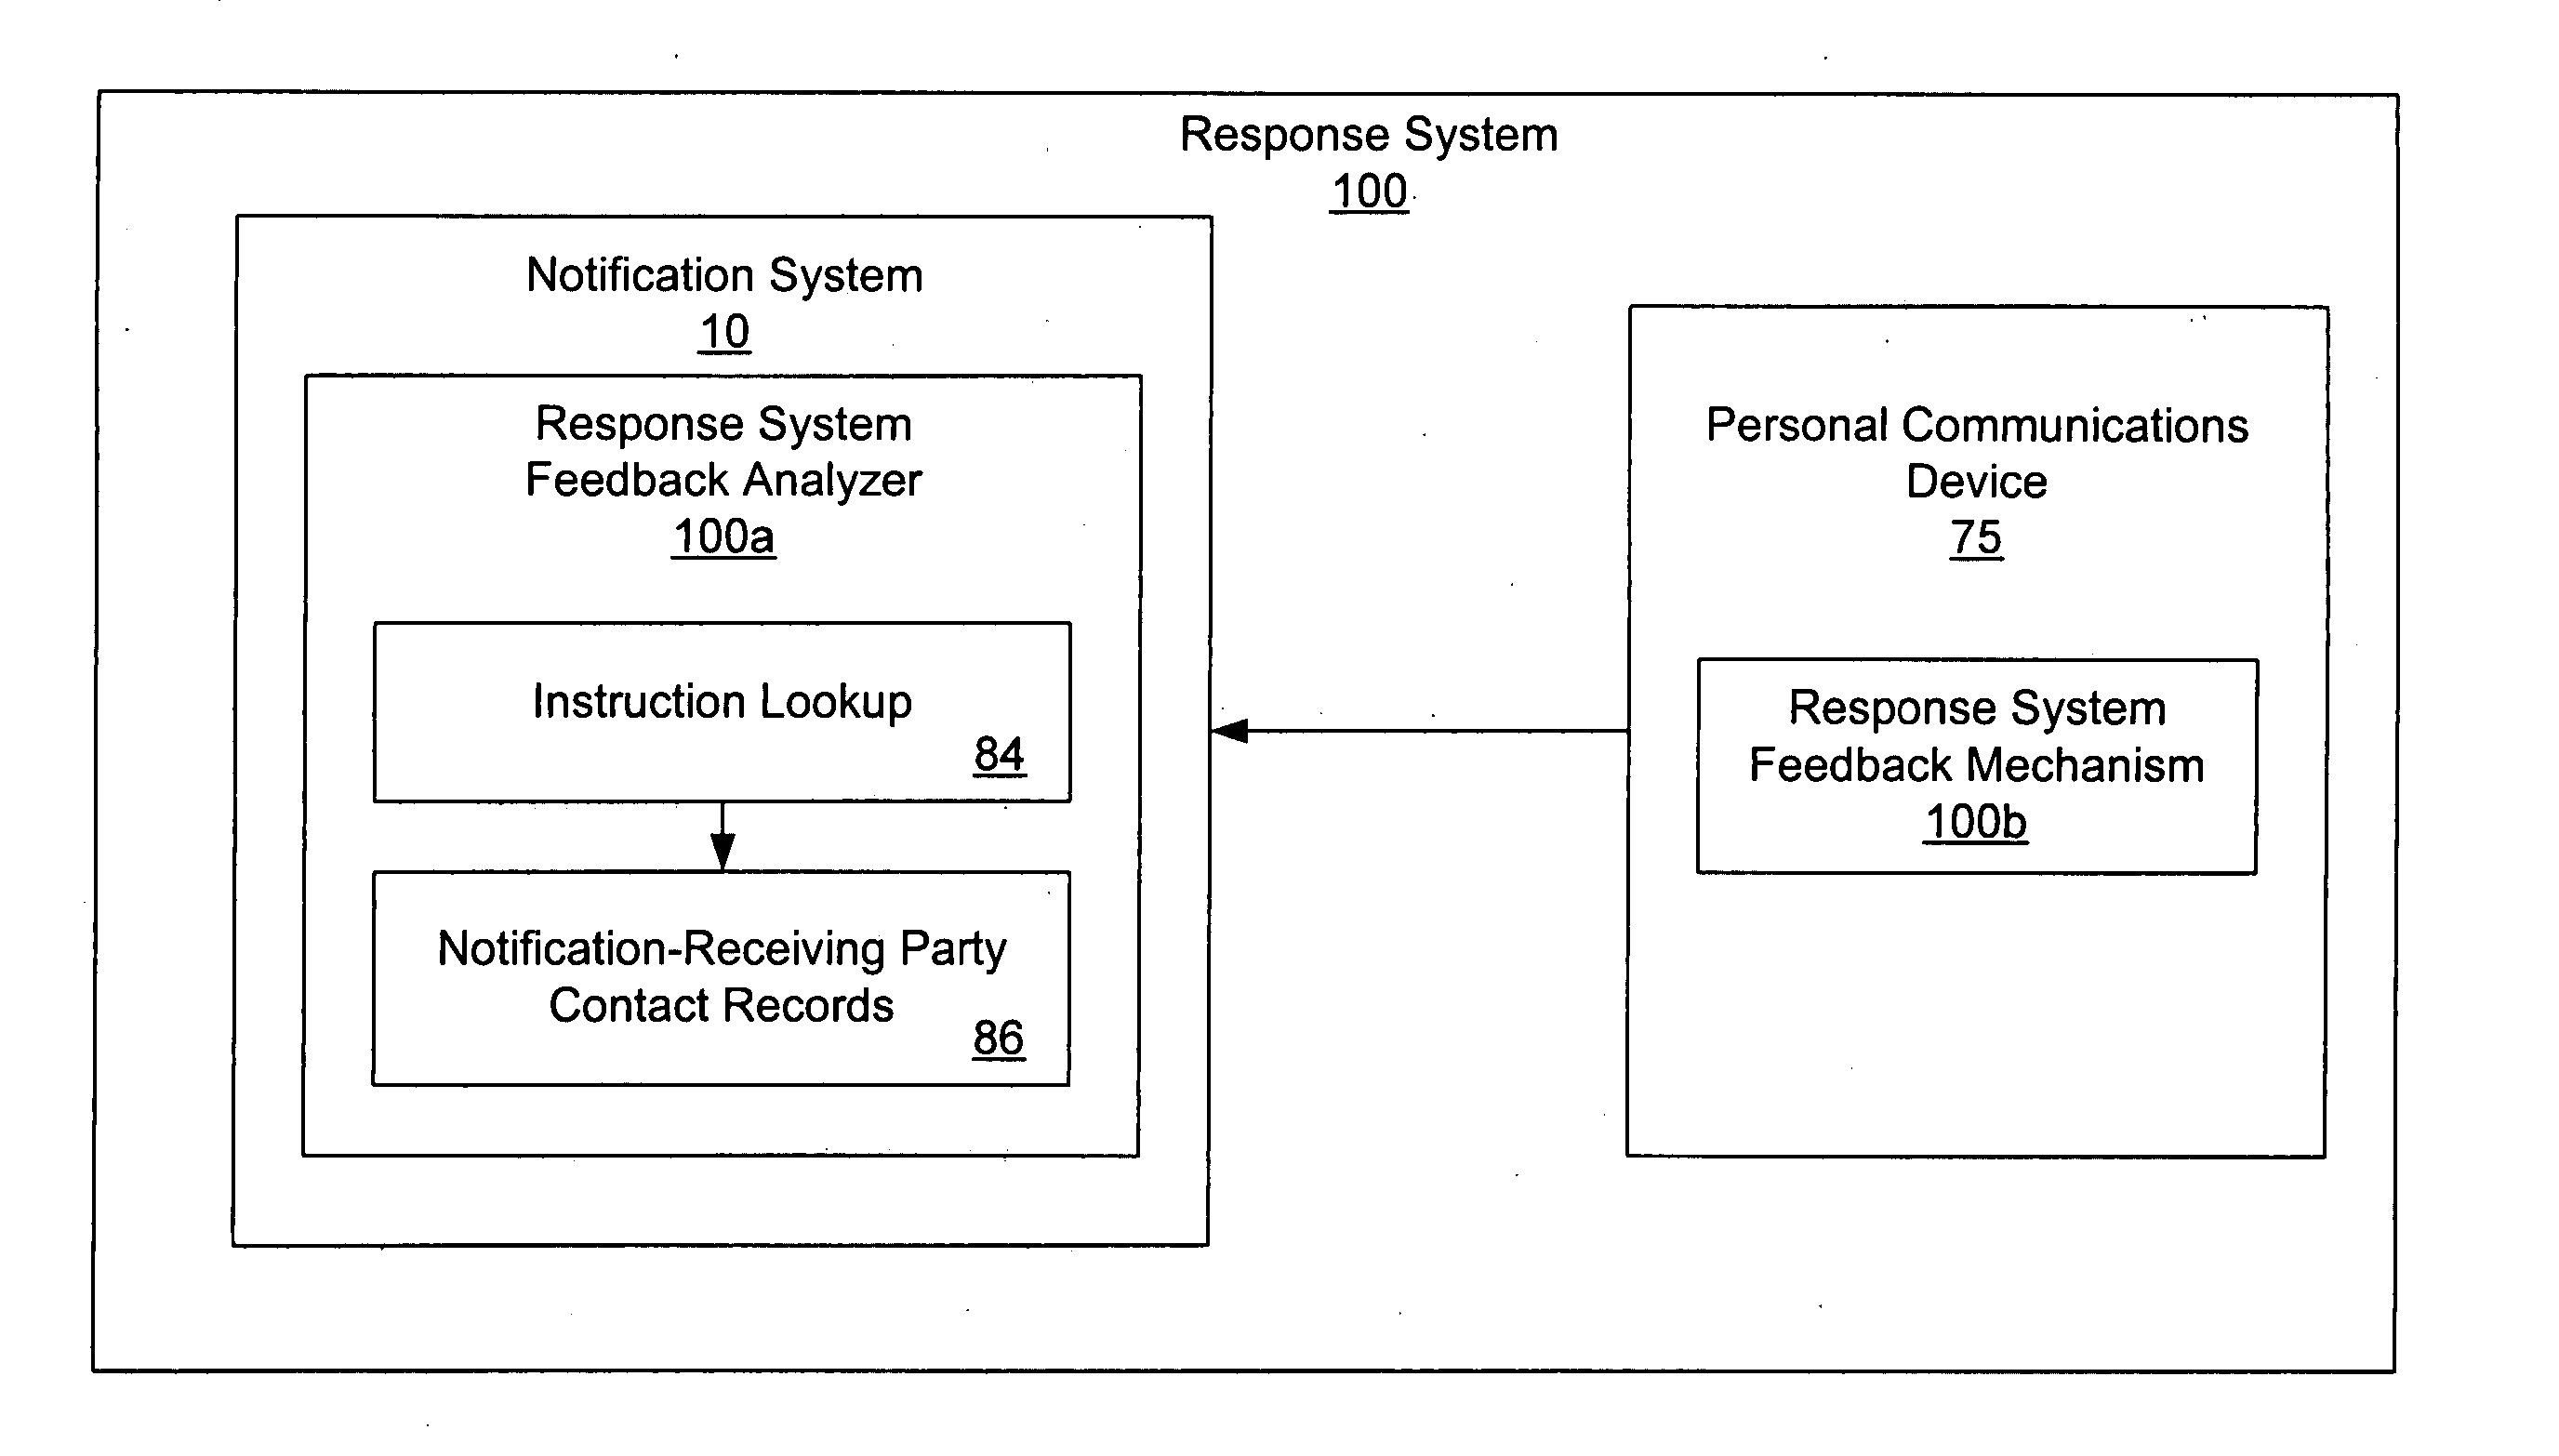 Response systems and methods for notification systems